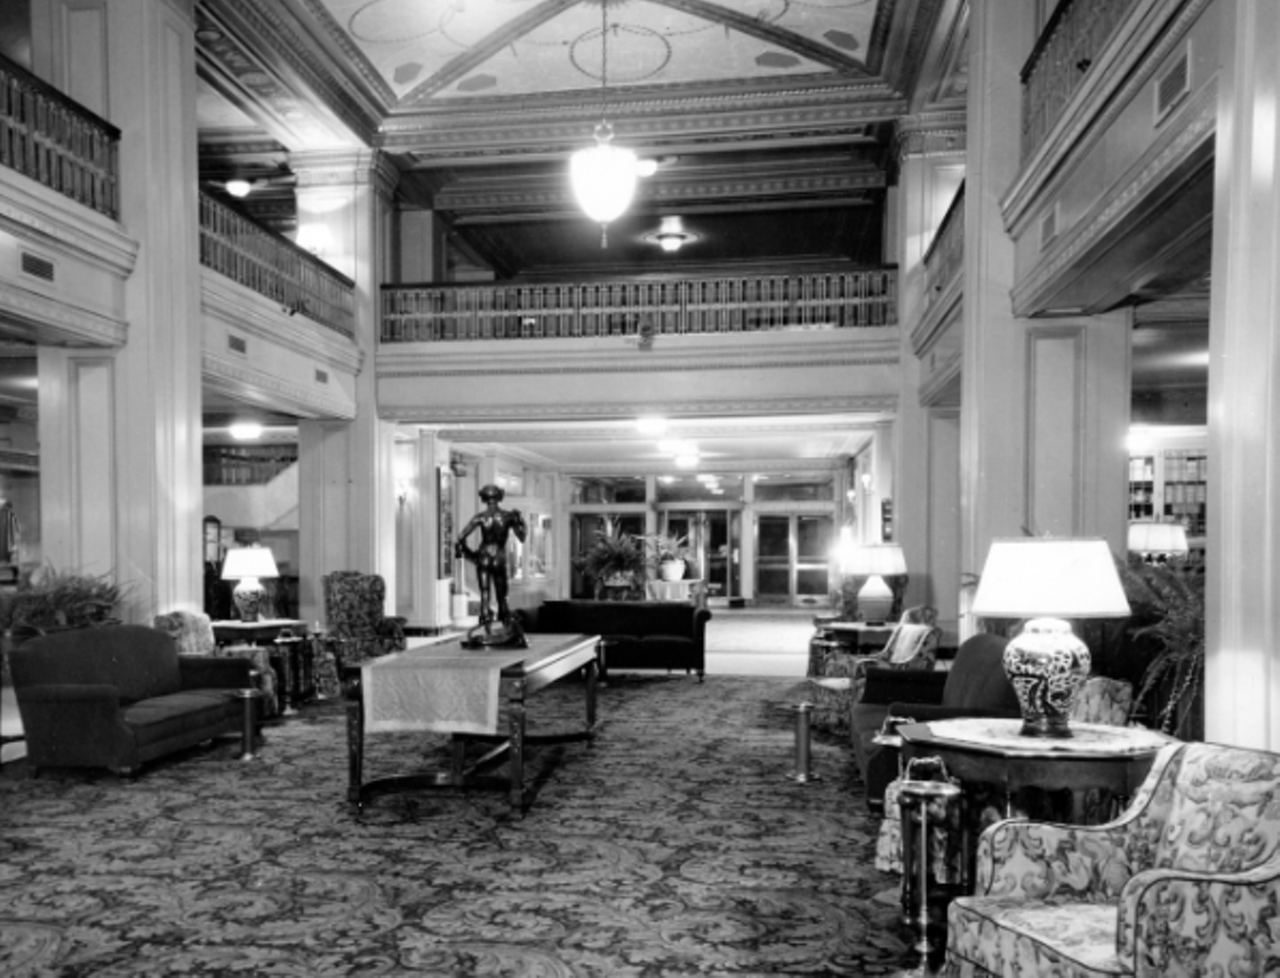 The lobby of the Hotel Winton.